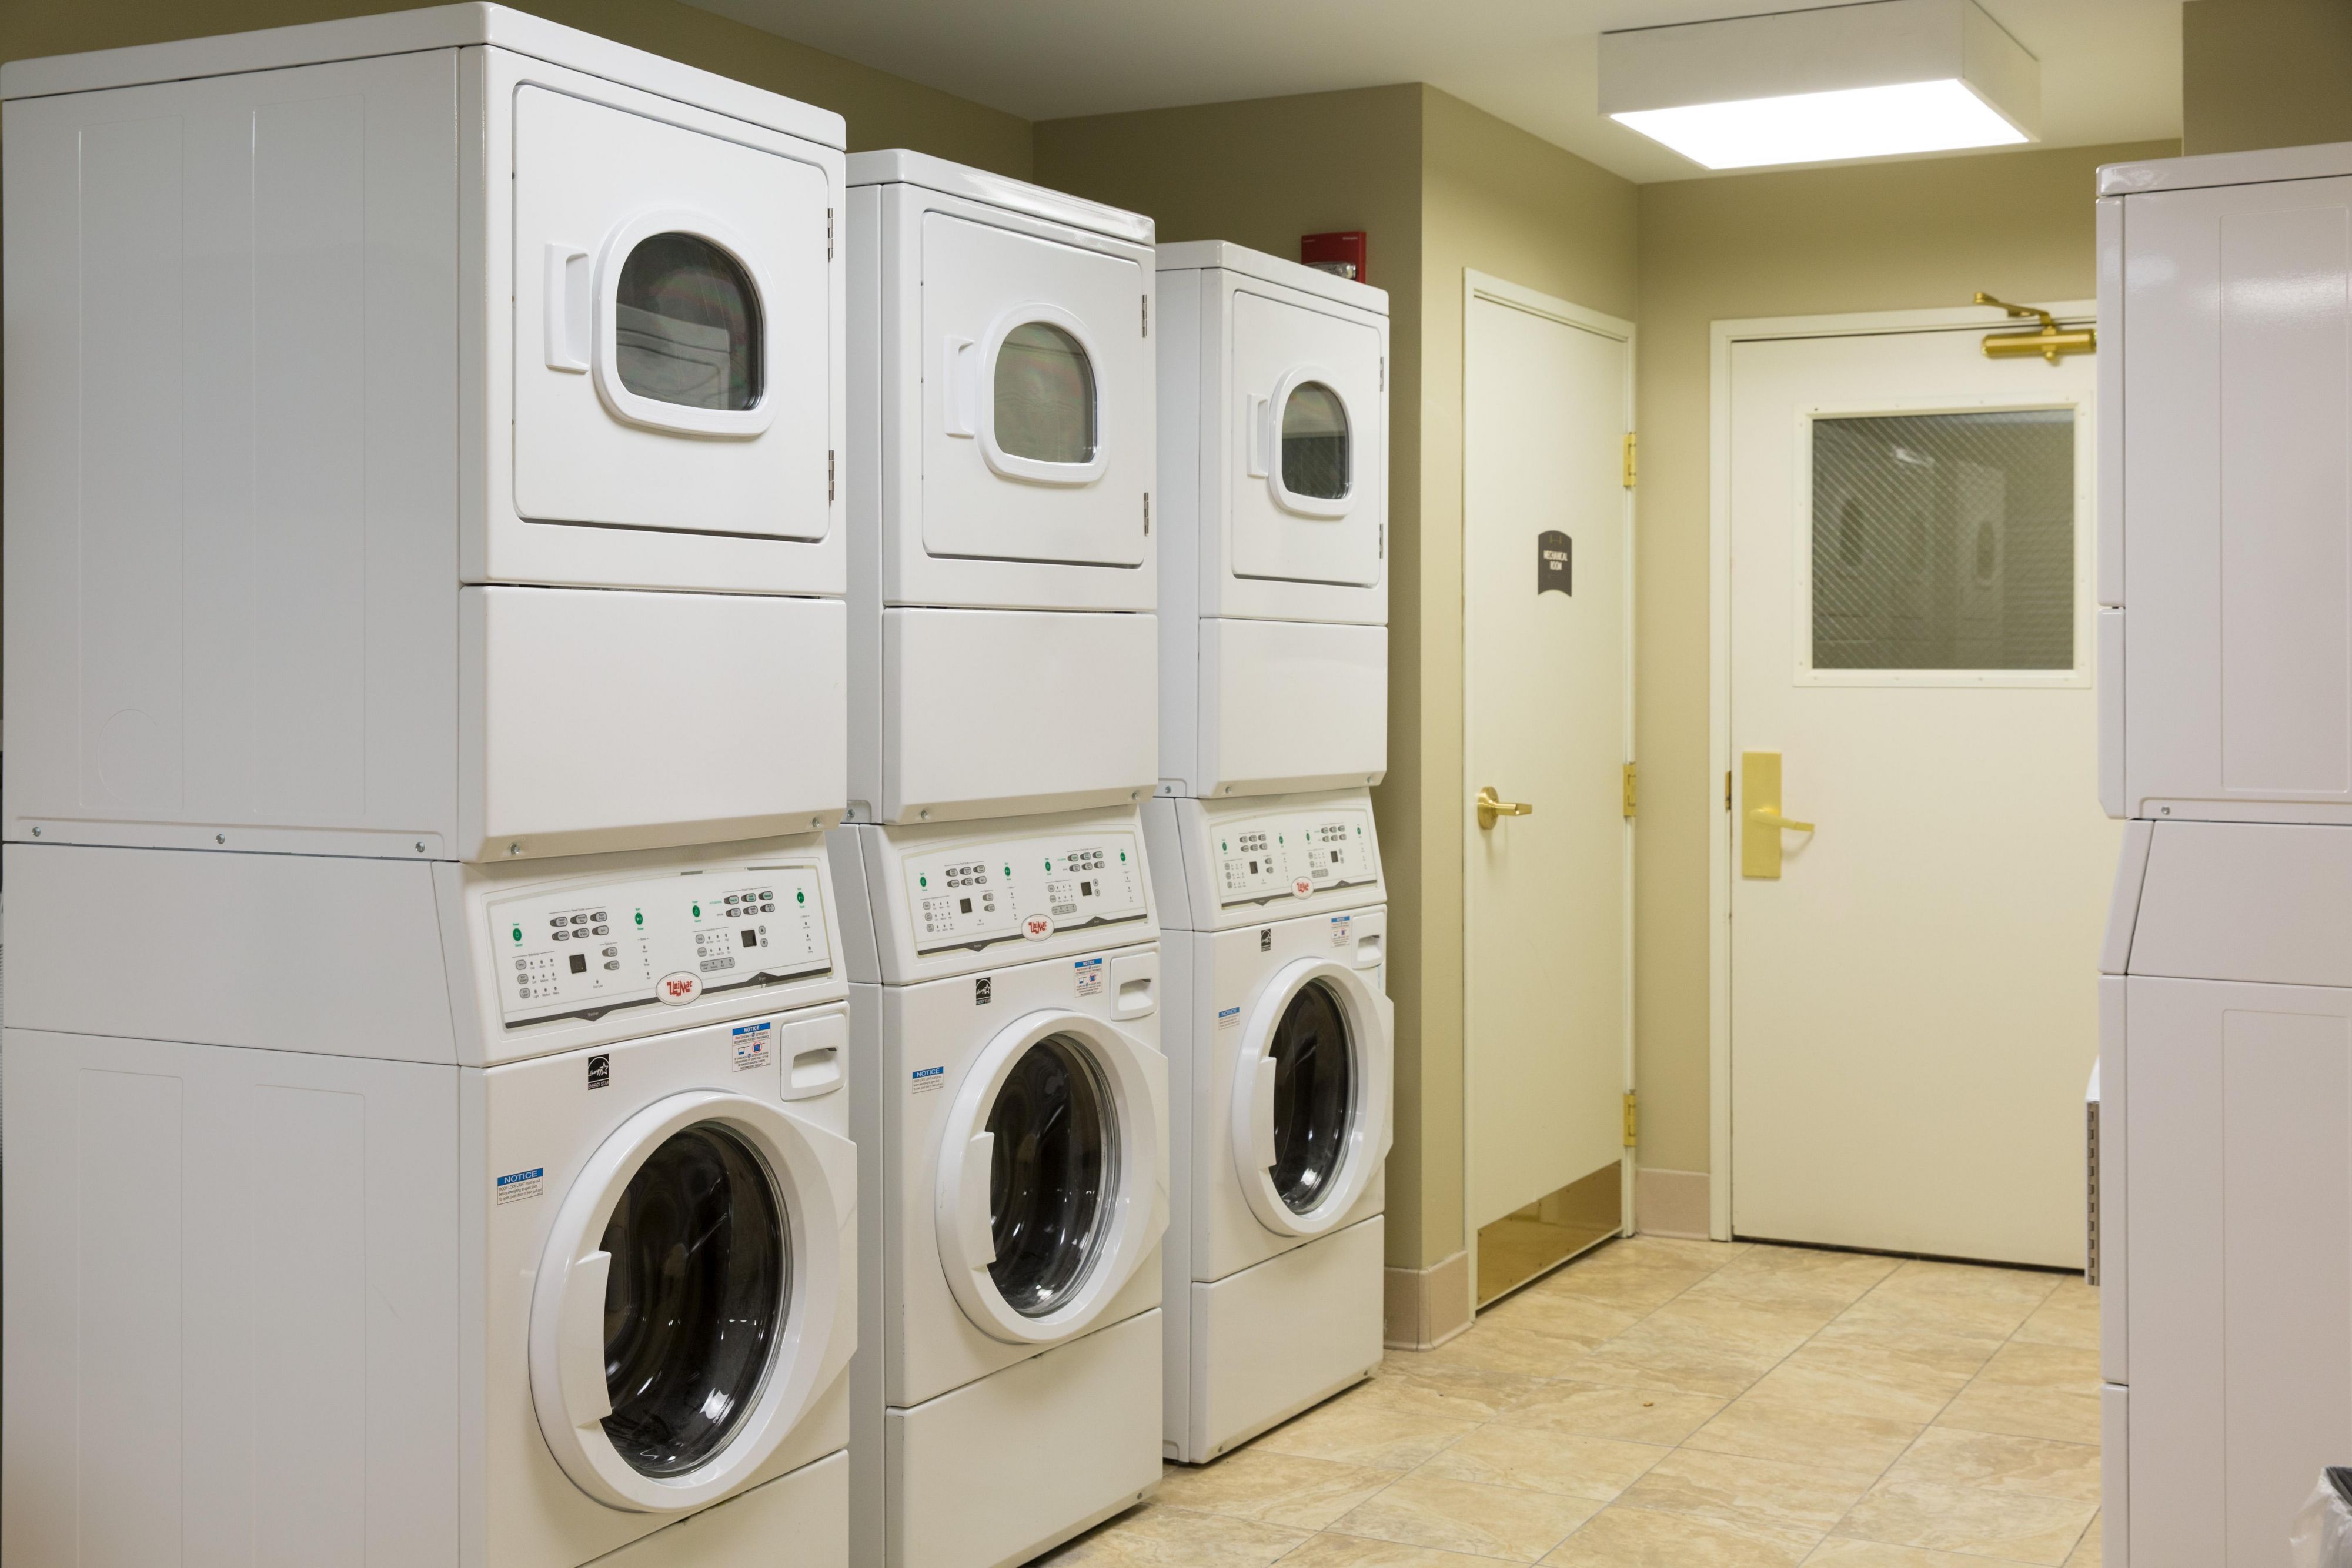 Free 24/7 COMPLIMENTARY on-site Guest self–laundry facility.  We offer Dry Cleaning Pickup/Laundry same day services. Light cleaning daily.